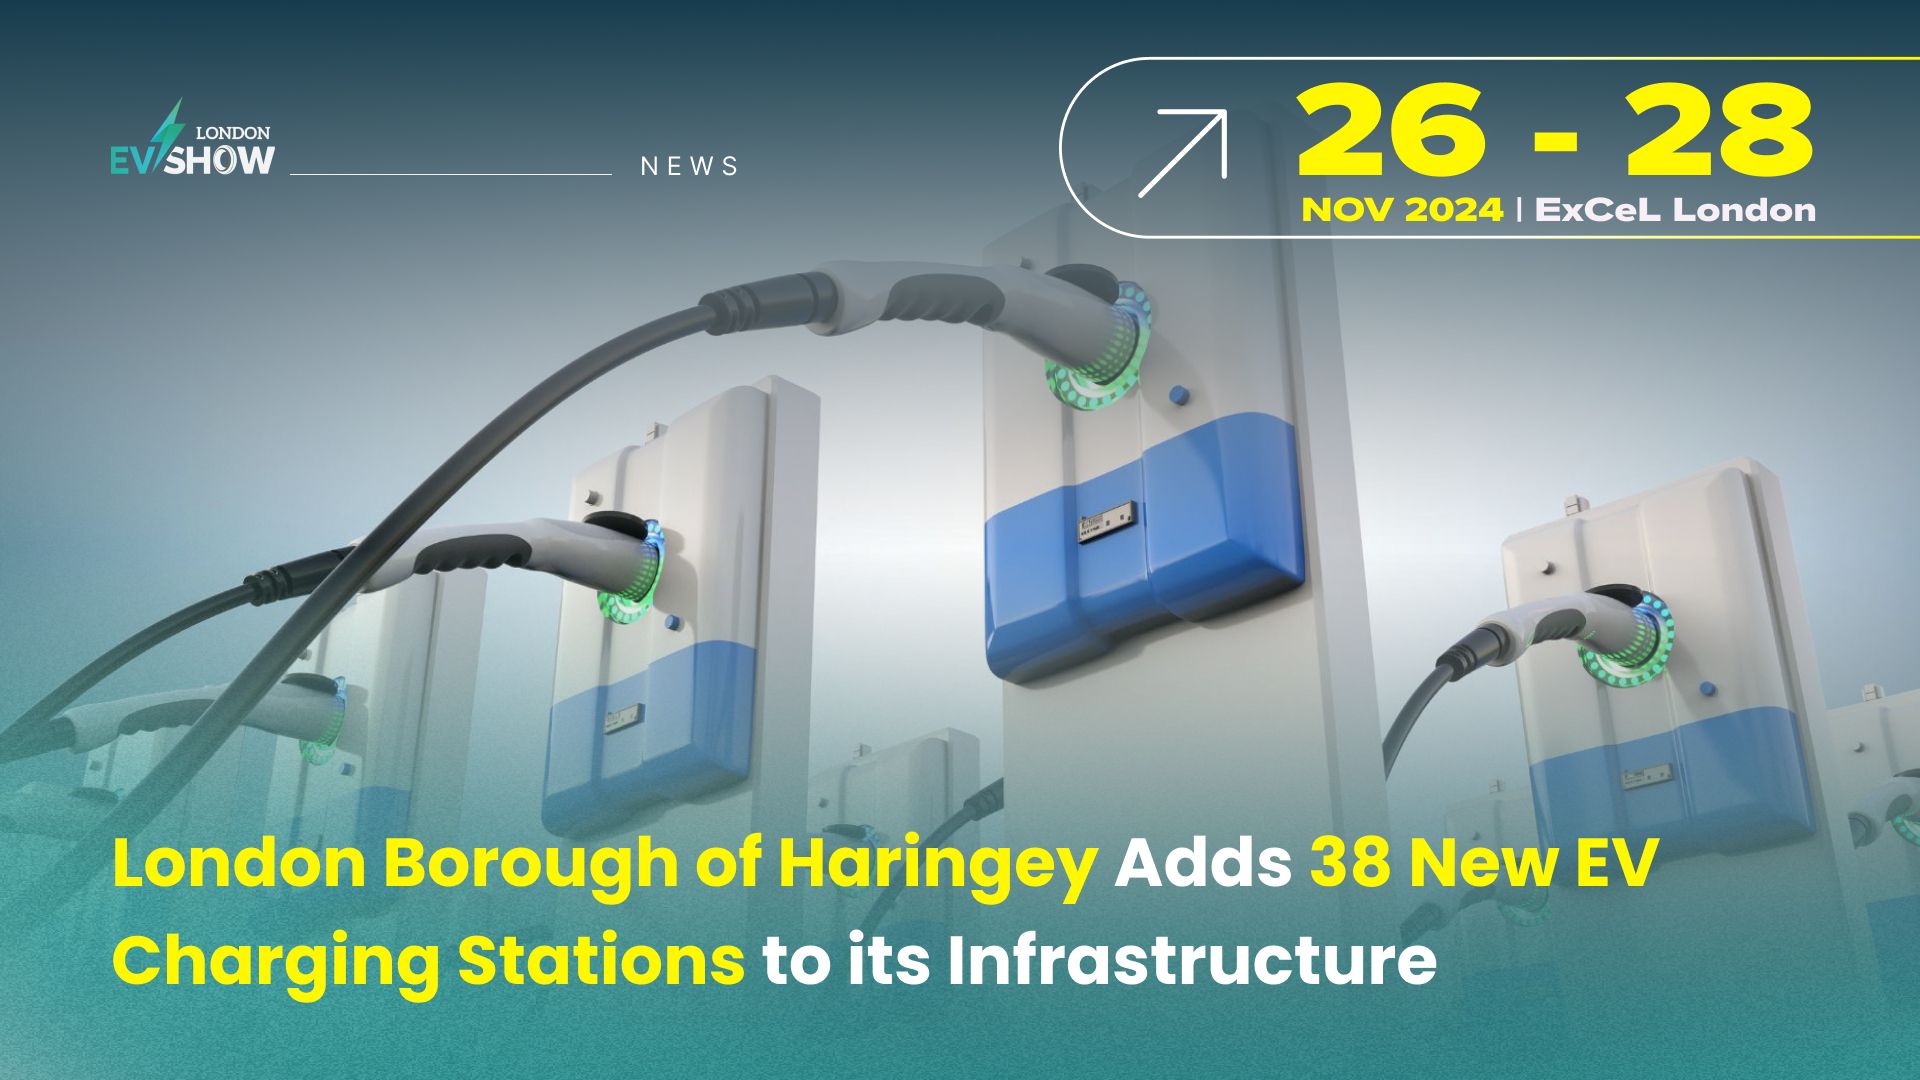 London borough of Haringey Adds 38 New EV Charging Stations to its Infrastructure